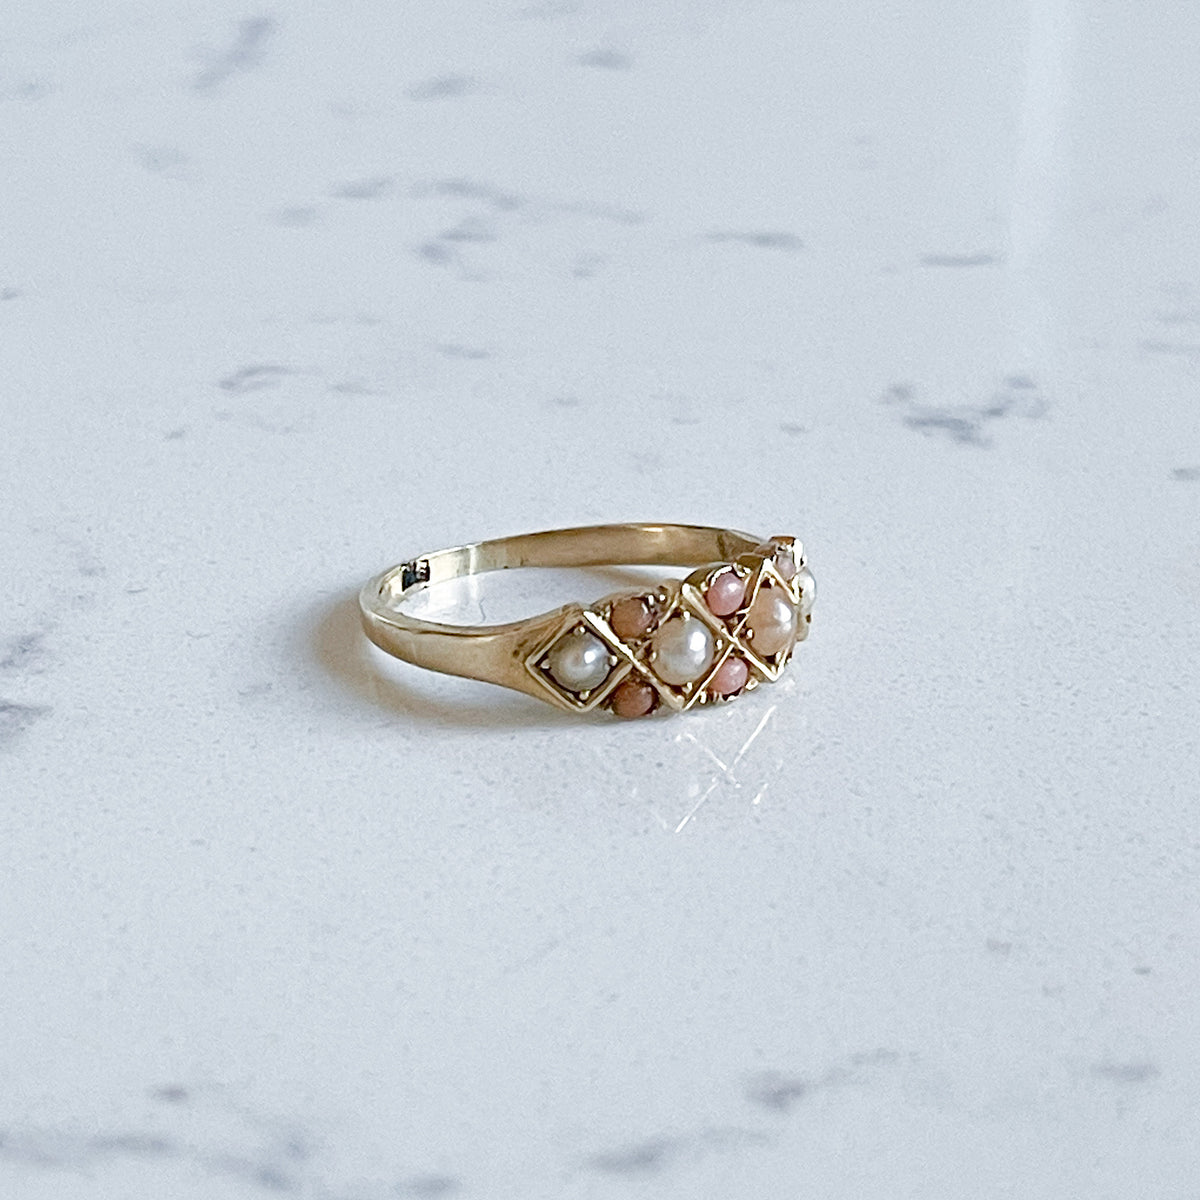 Antique 18K Gold Ring with Coral and Pearl